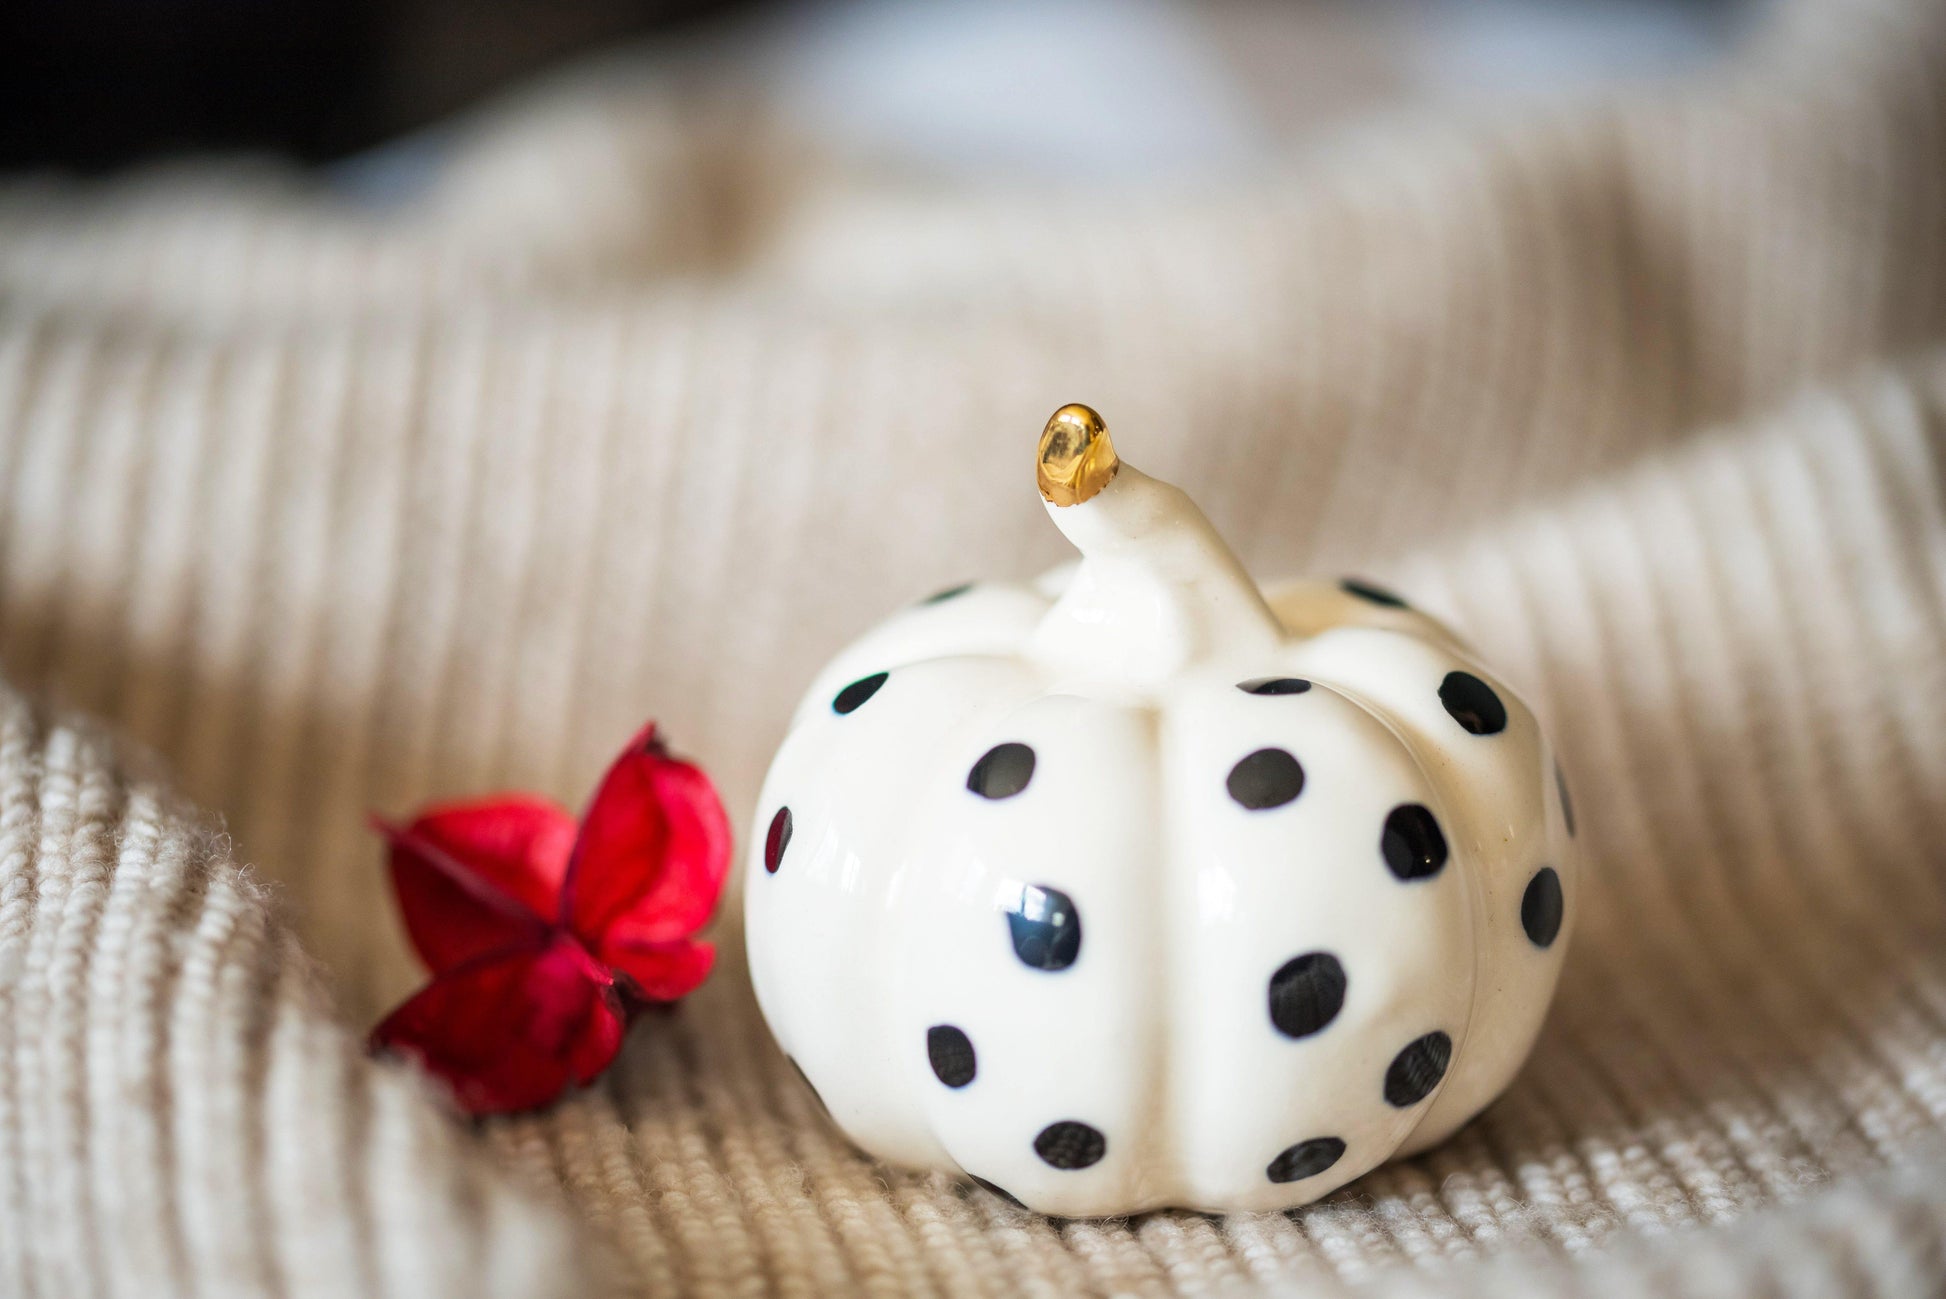 PORCELAIN SMALL BLACK DOTTED PUMPKIN FIGURINE WITH REAL GOLD - ZLATNAporcelain